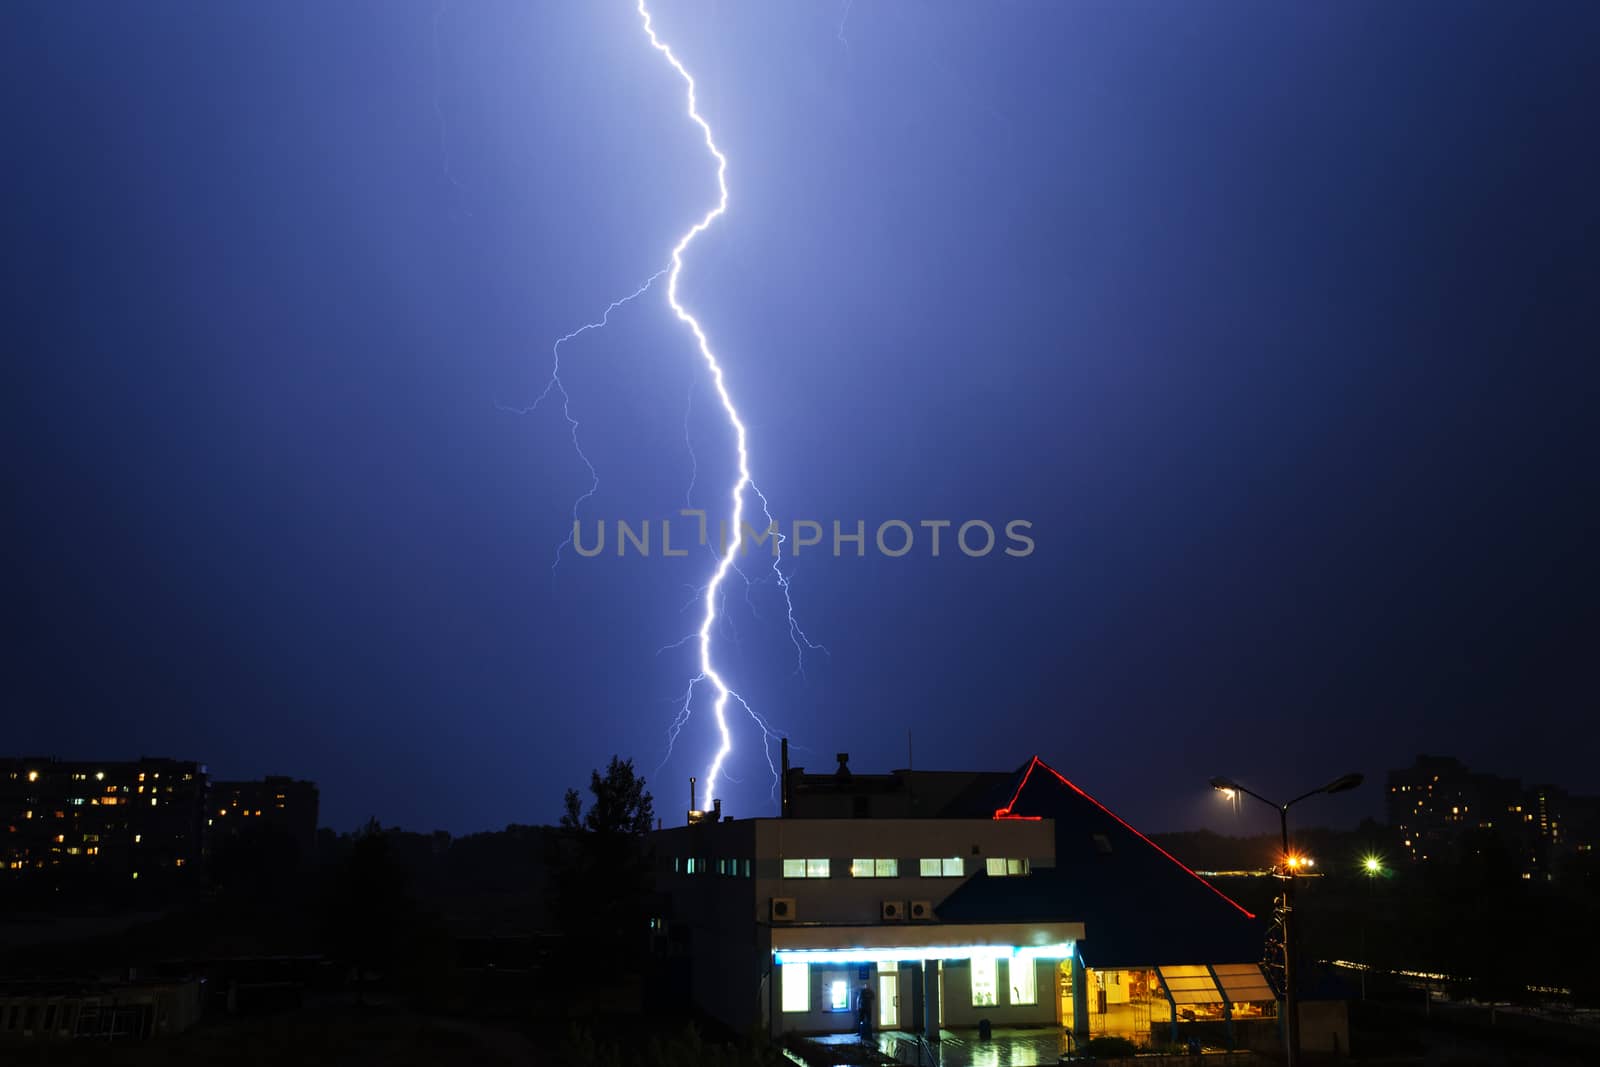 Severe lightning storm with rain over a city buildings at night